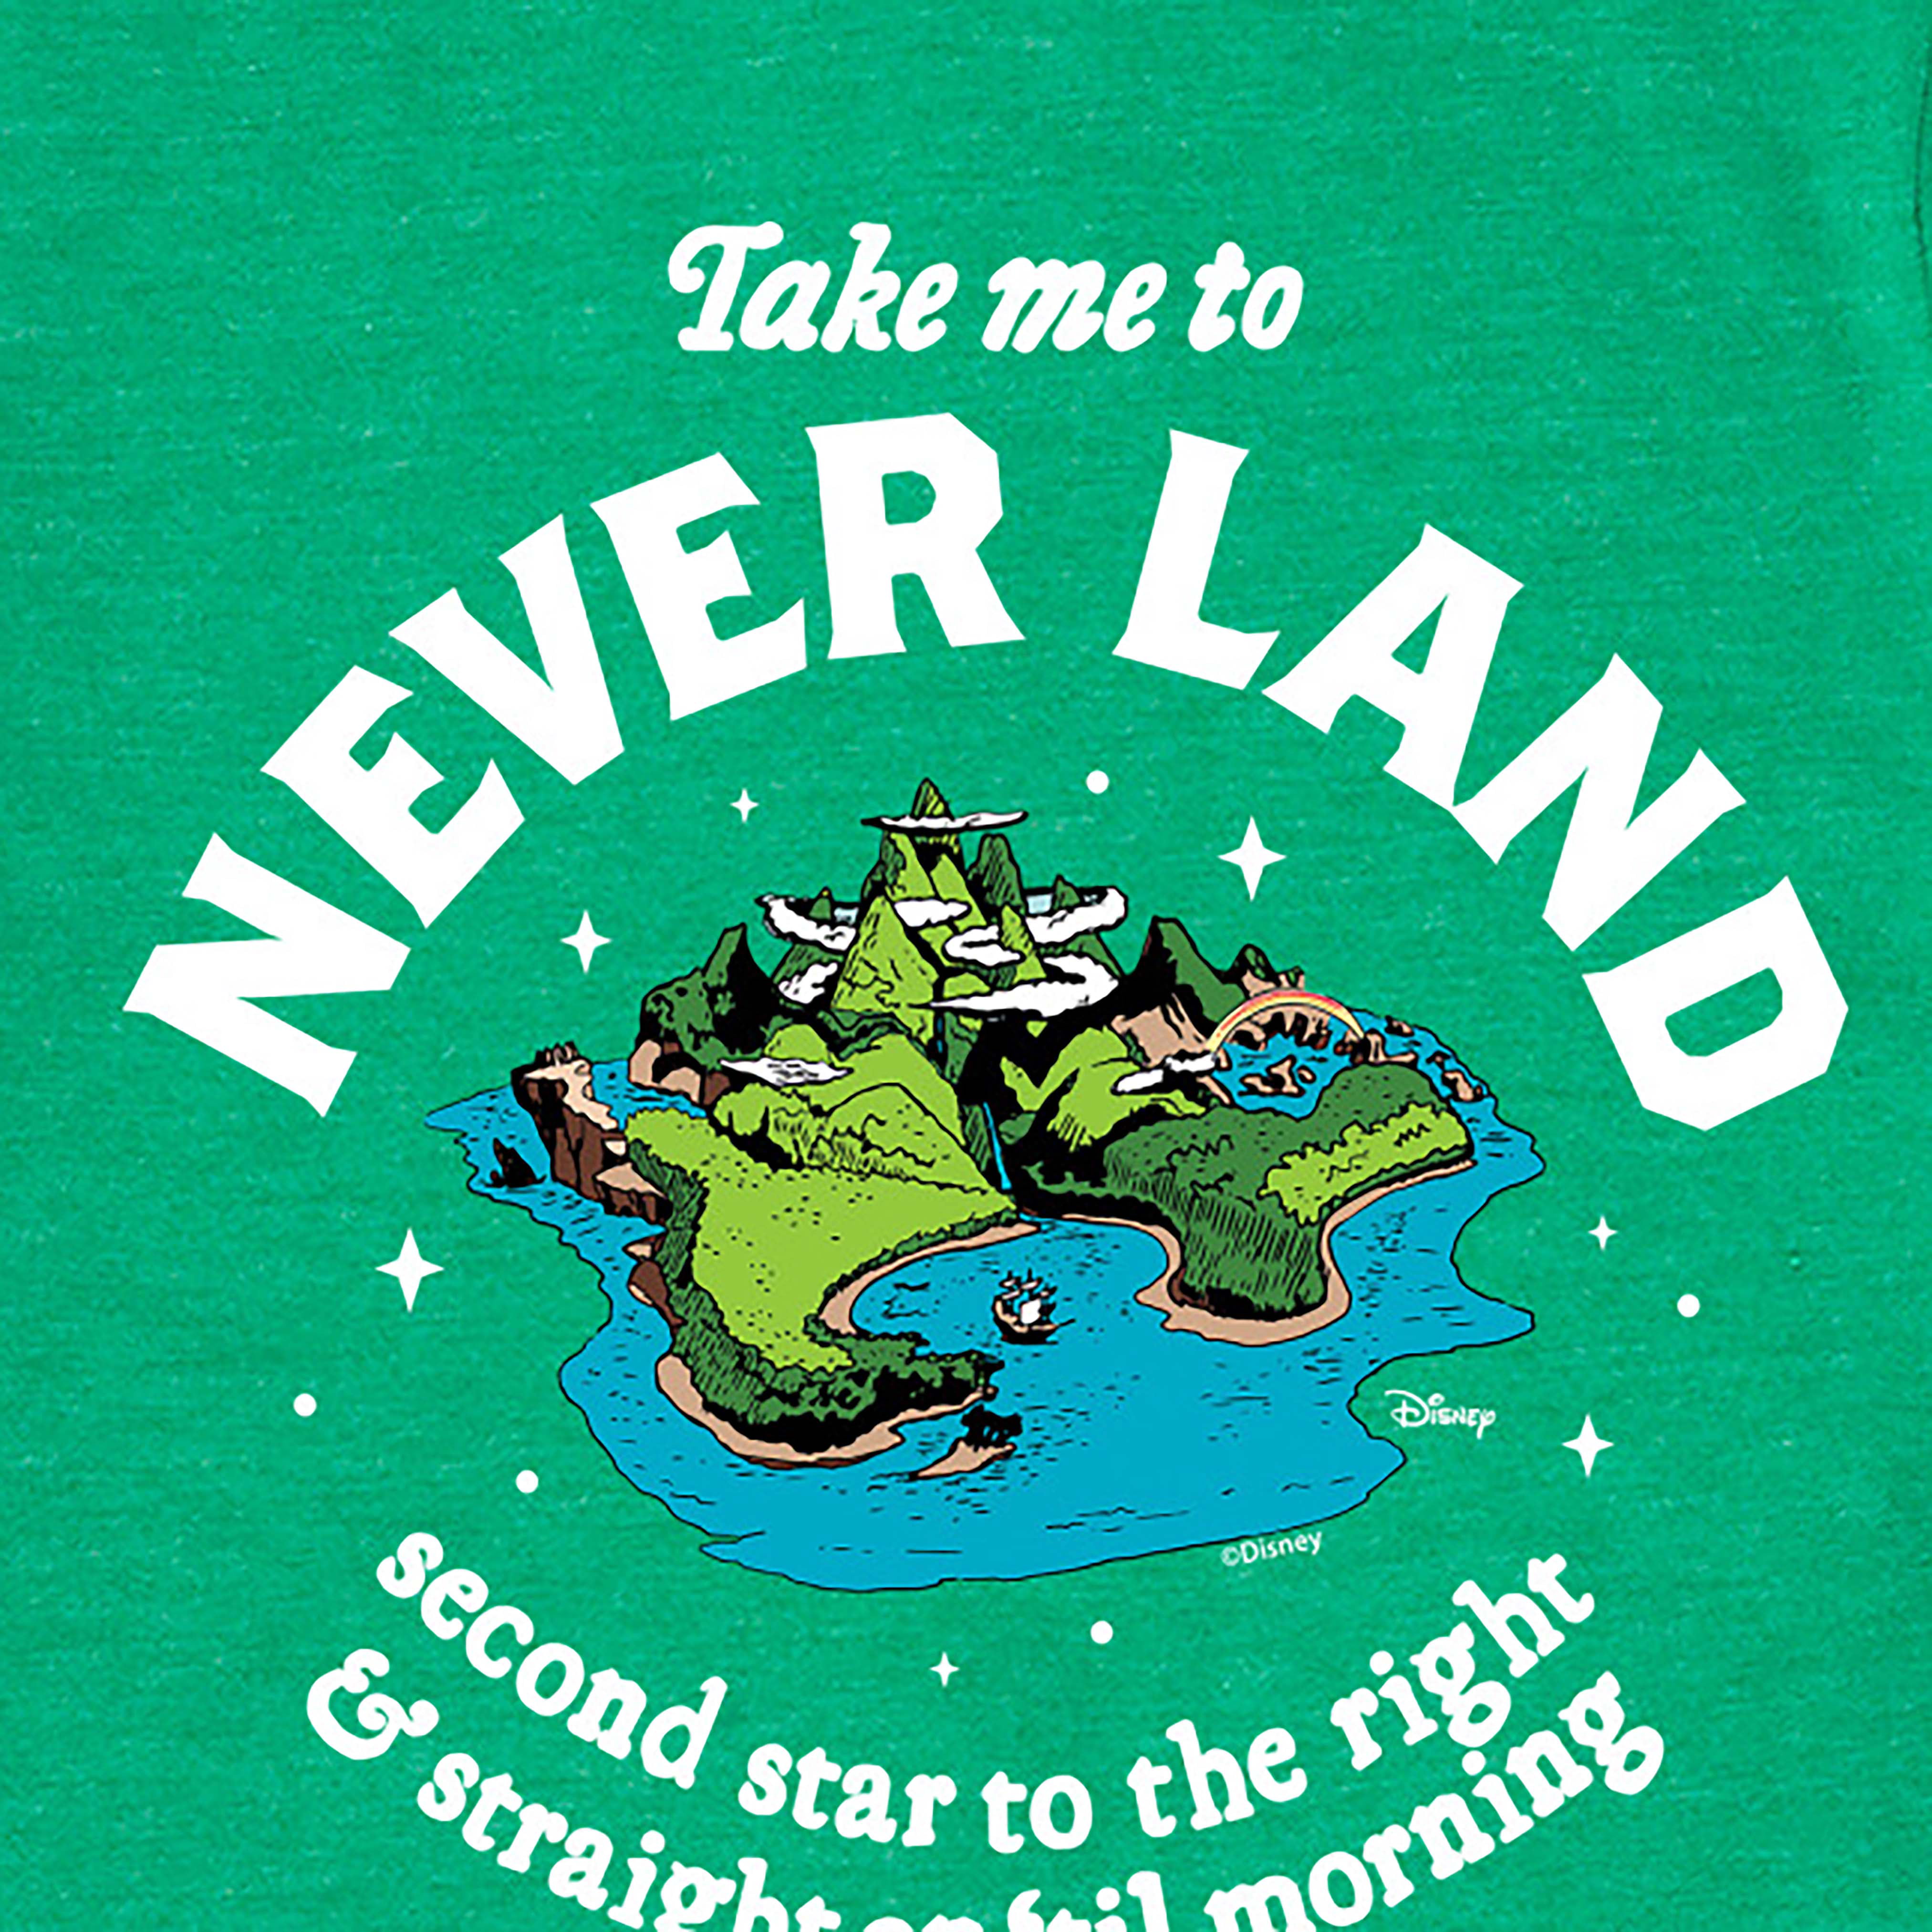 Disney - Sleeve to Second - Graphic Neverland Pan the - Right Me Star Youth Toddler Short - Take T-Shirt Peter to And